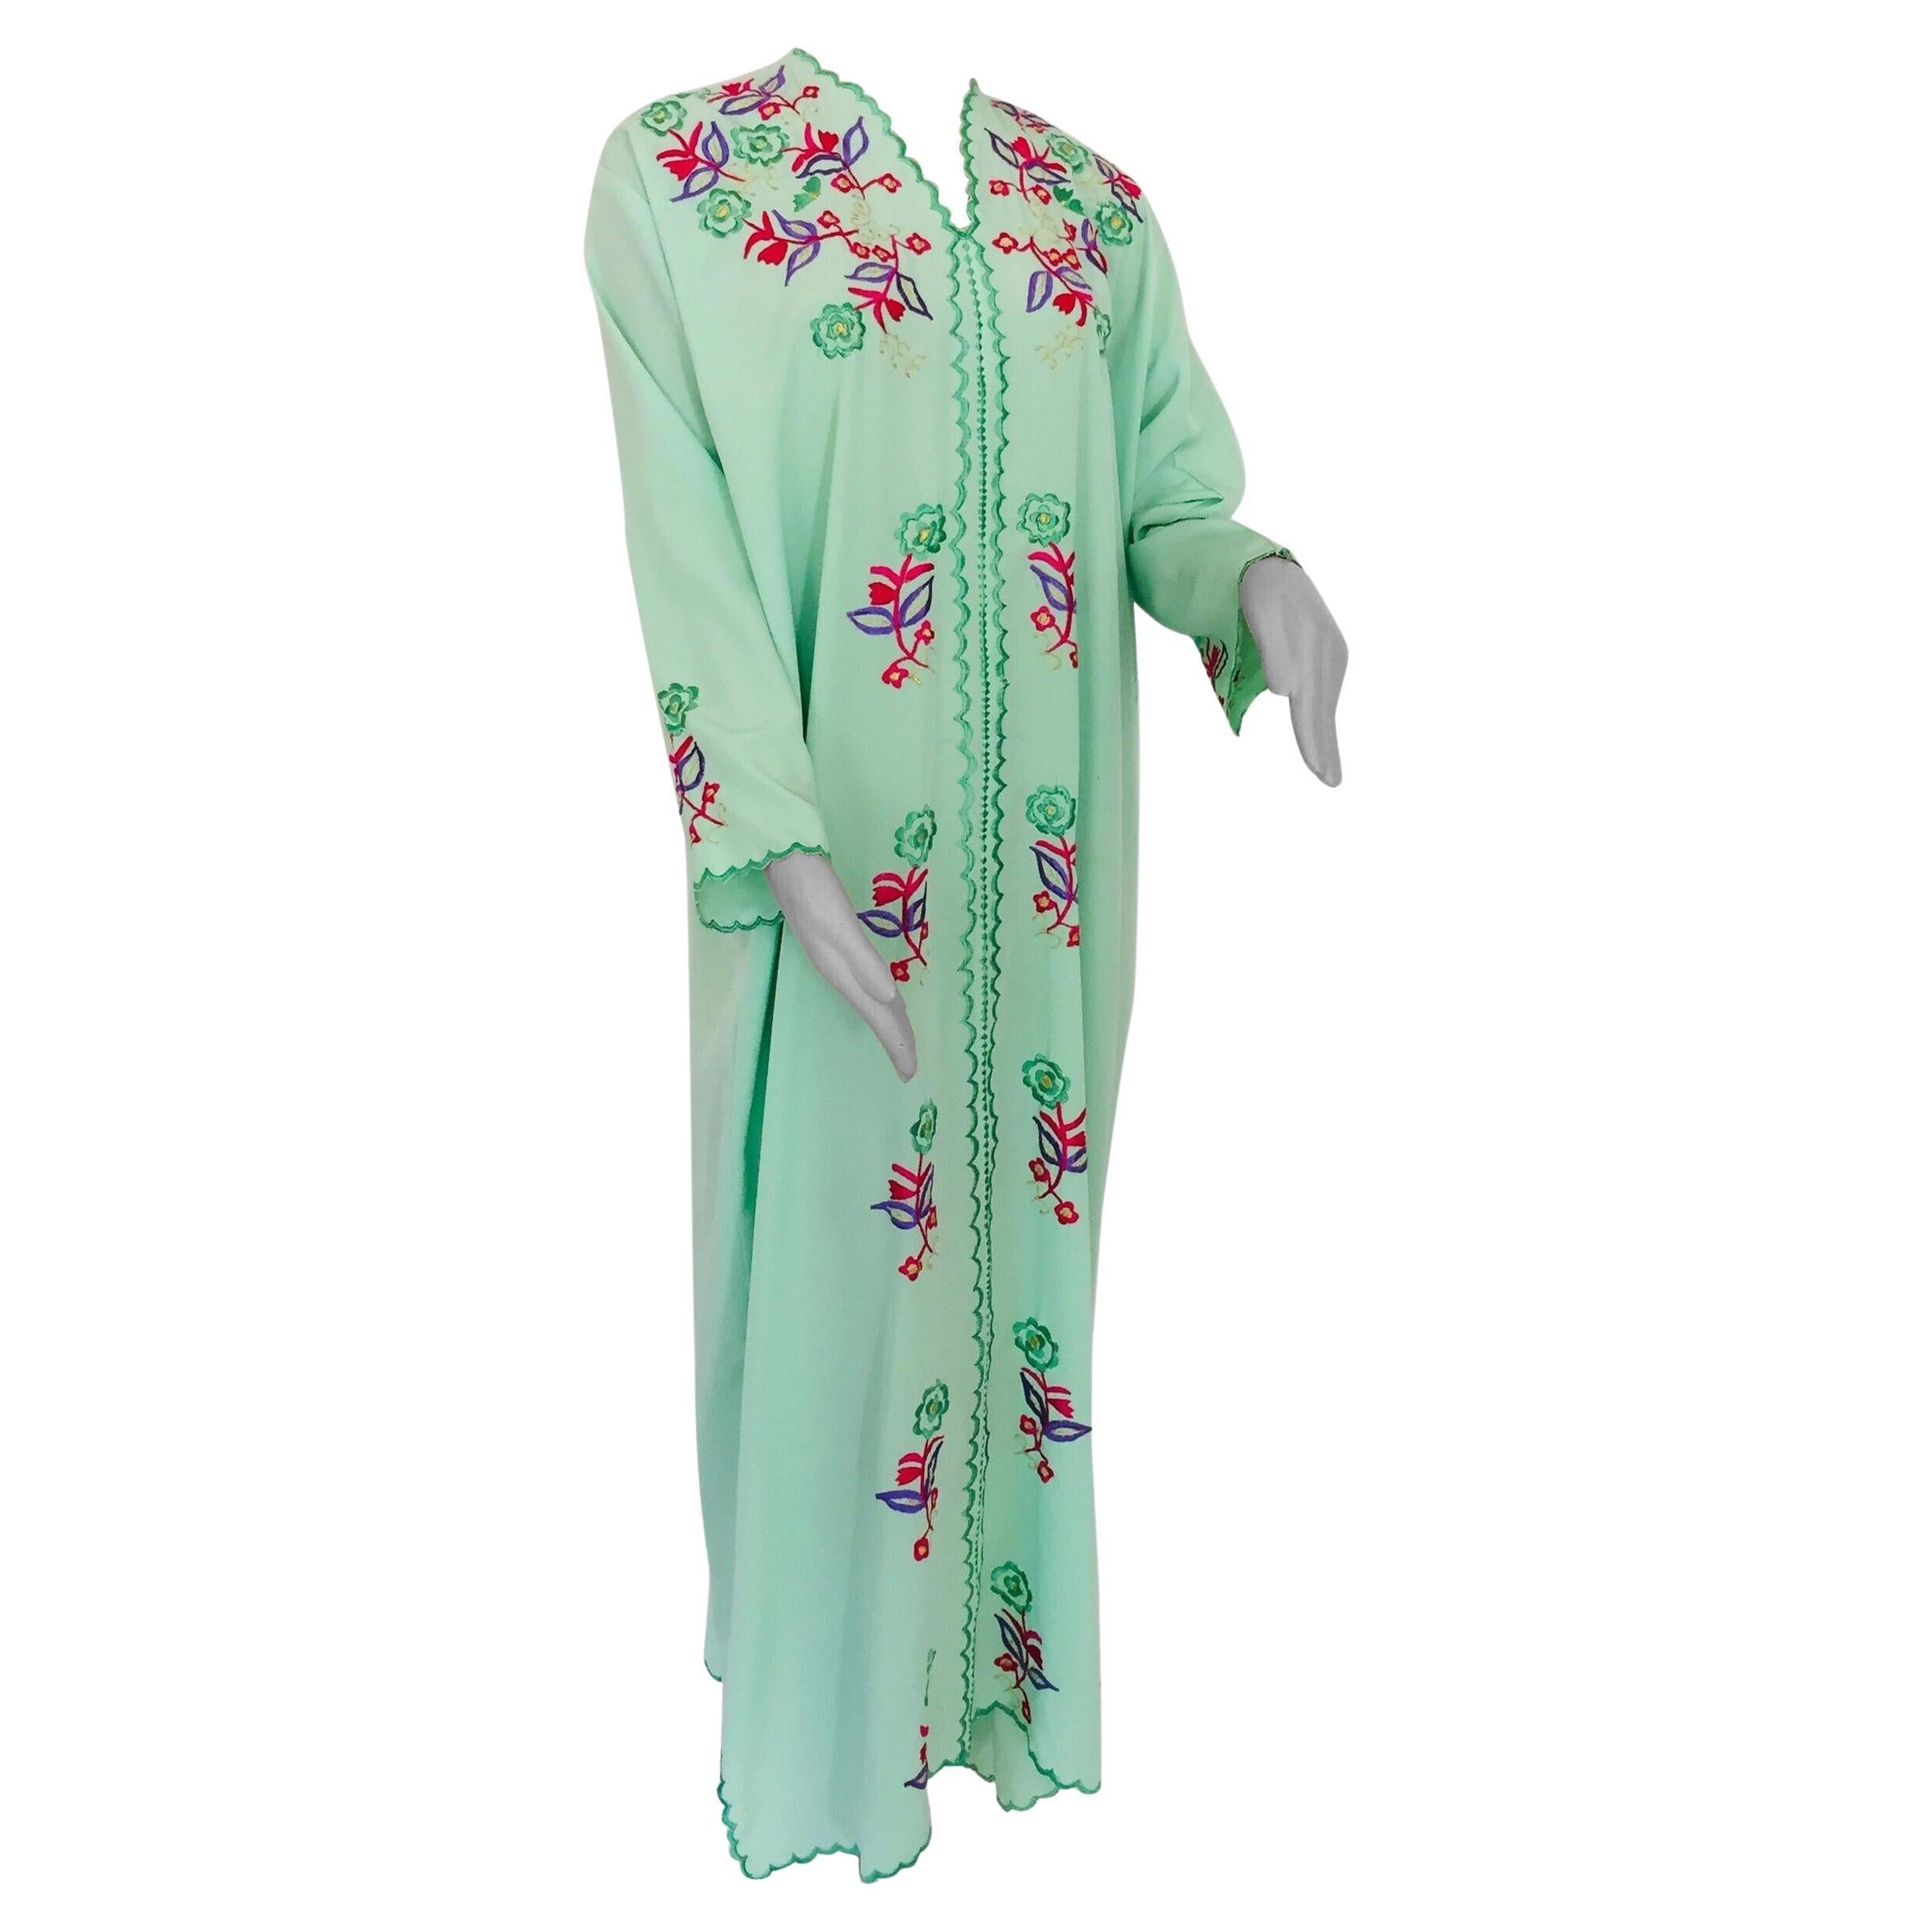 Moroccan Green with Floral Embroidered Caftan, Kaftan